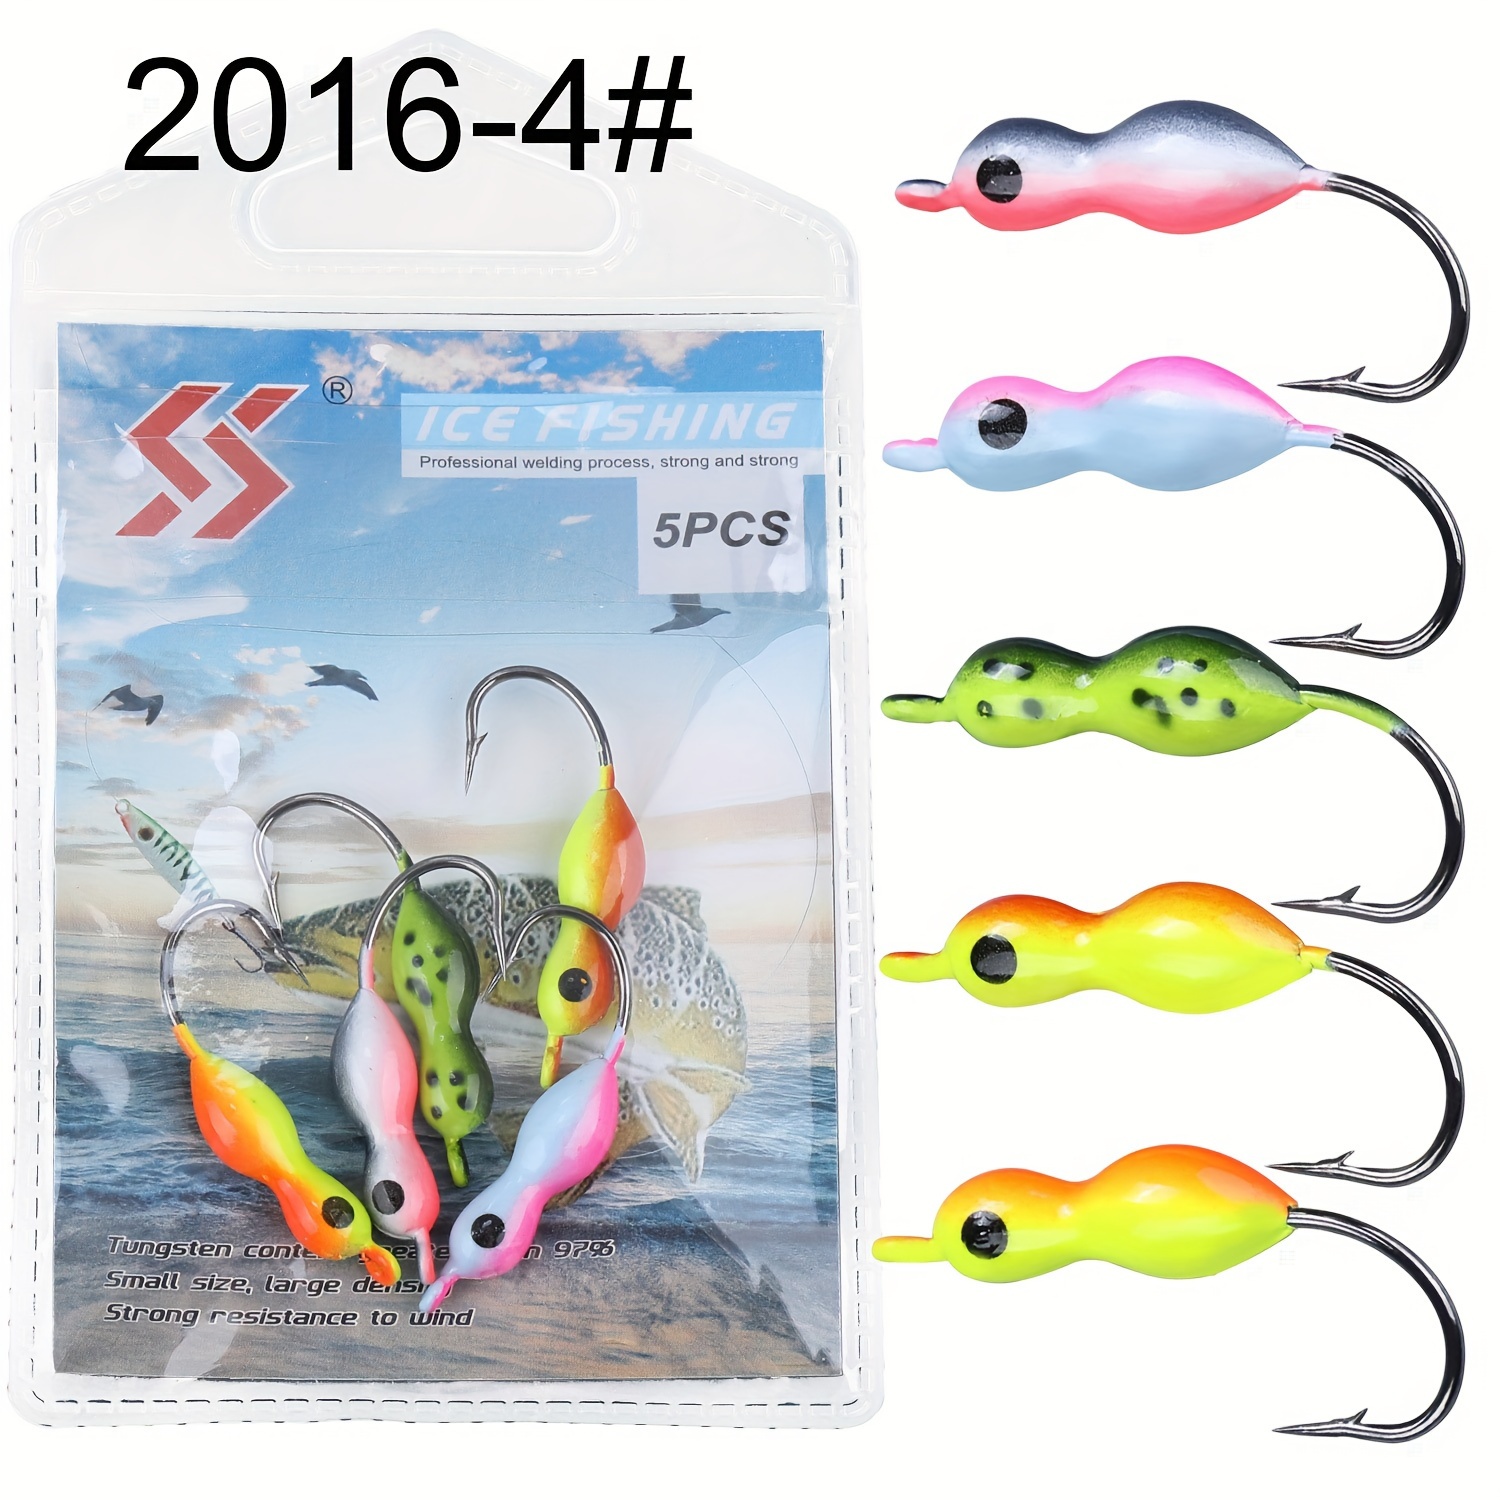 Goture 8pcs/lot Tungsten Jig Ice Fishing Lure Kit for Winter